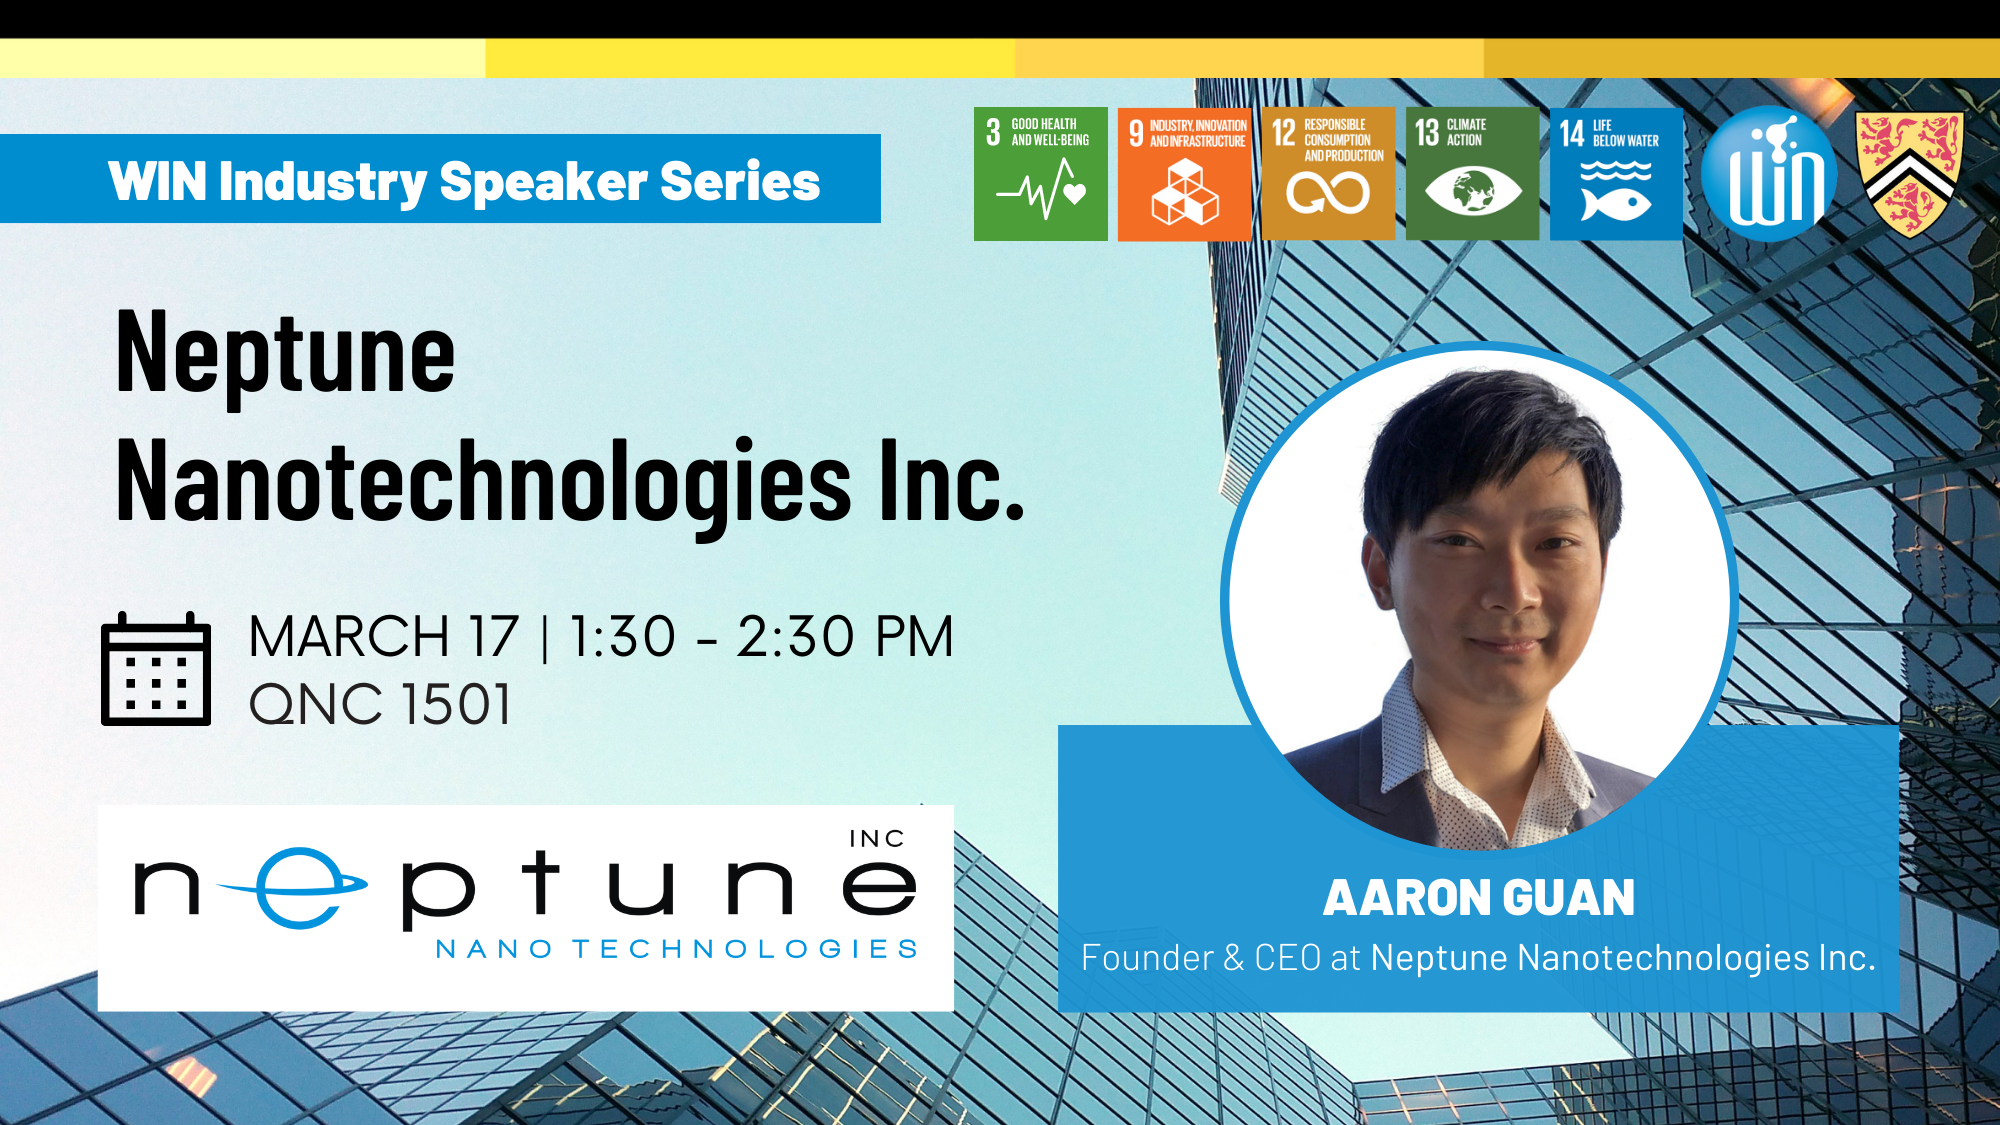 Ad graphic for WIN industry speaker, includes photo of Arron Guan. All other information can be found in the event listing. 